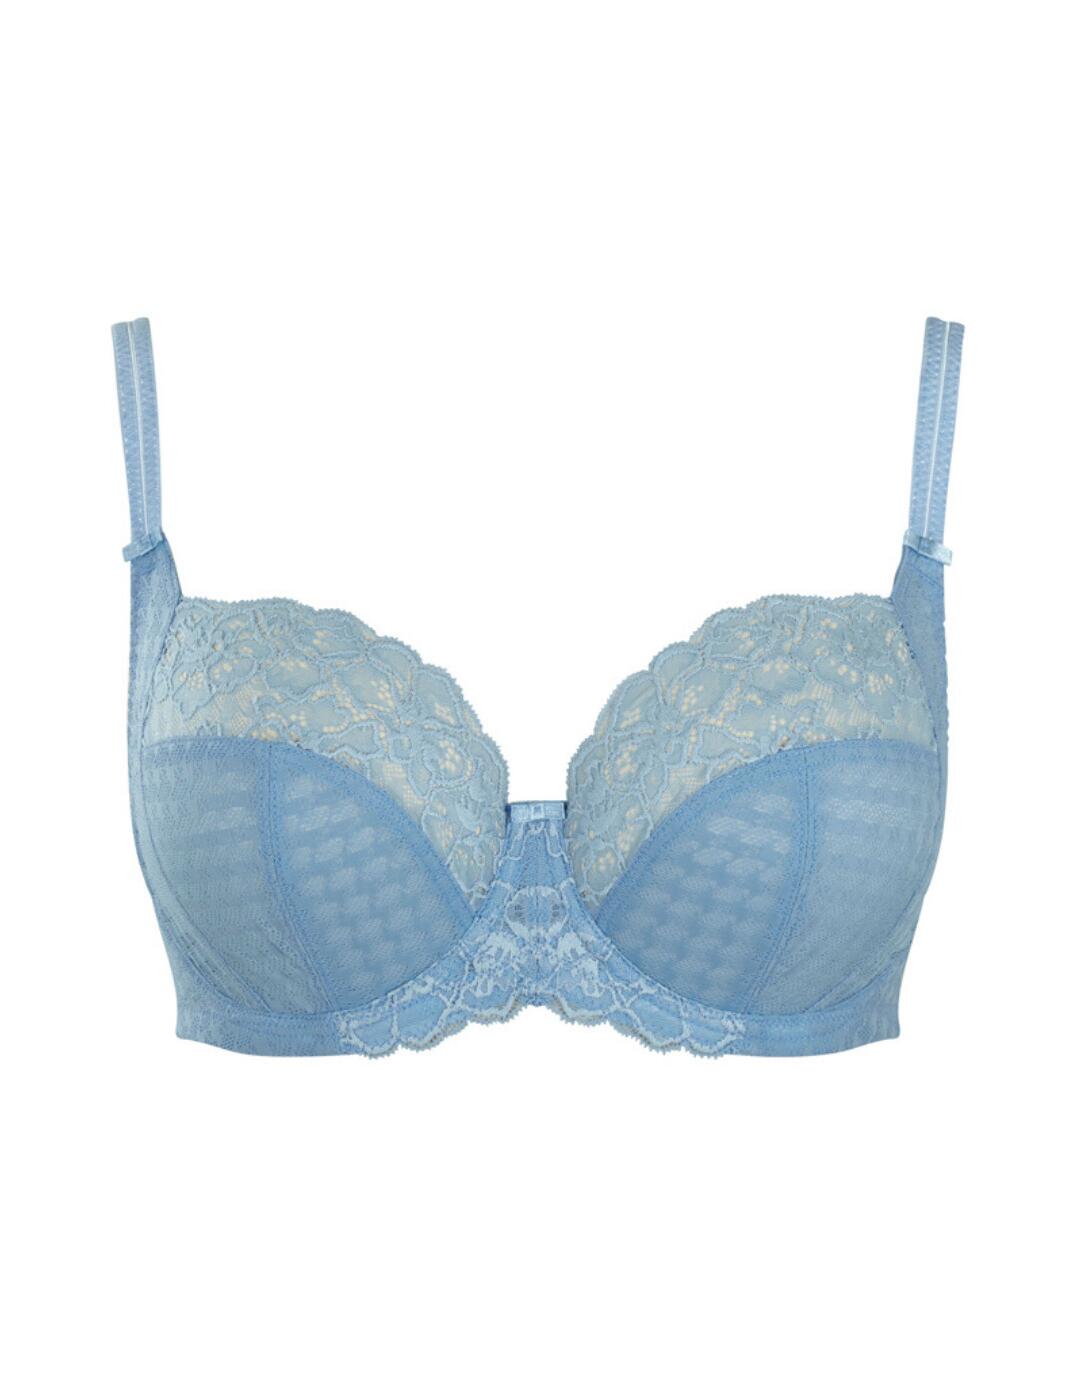 Buy A-GG Pastel Blue Recycled Lace Full Cup Non Padded Bra - 36B, Bras